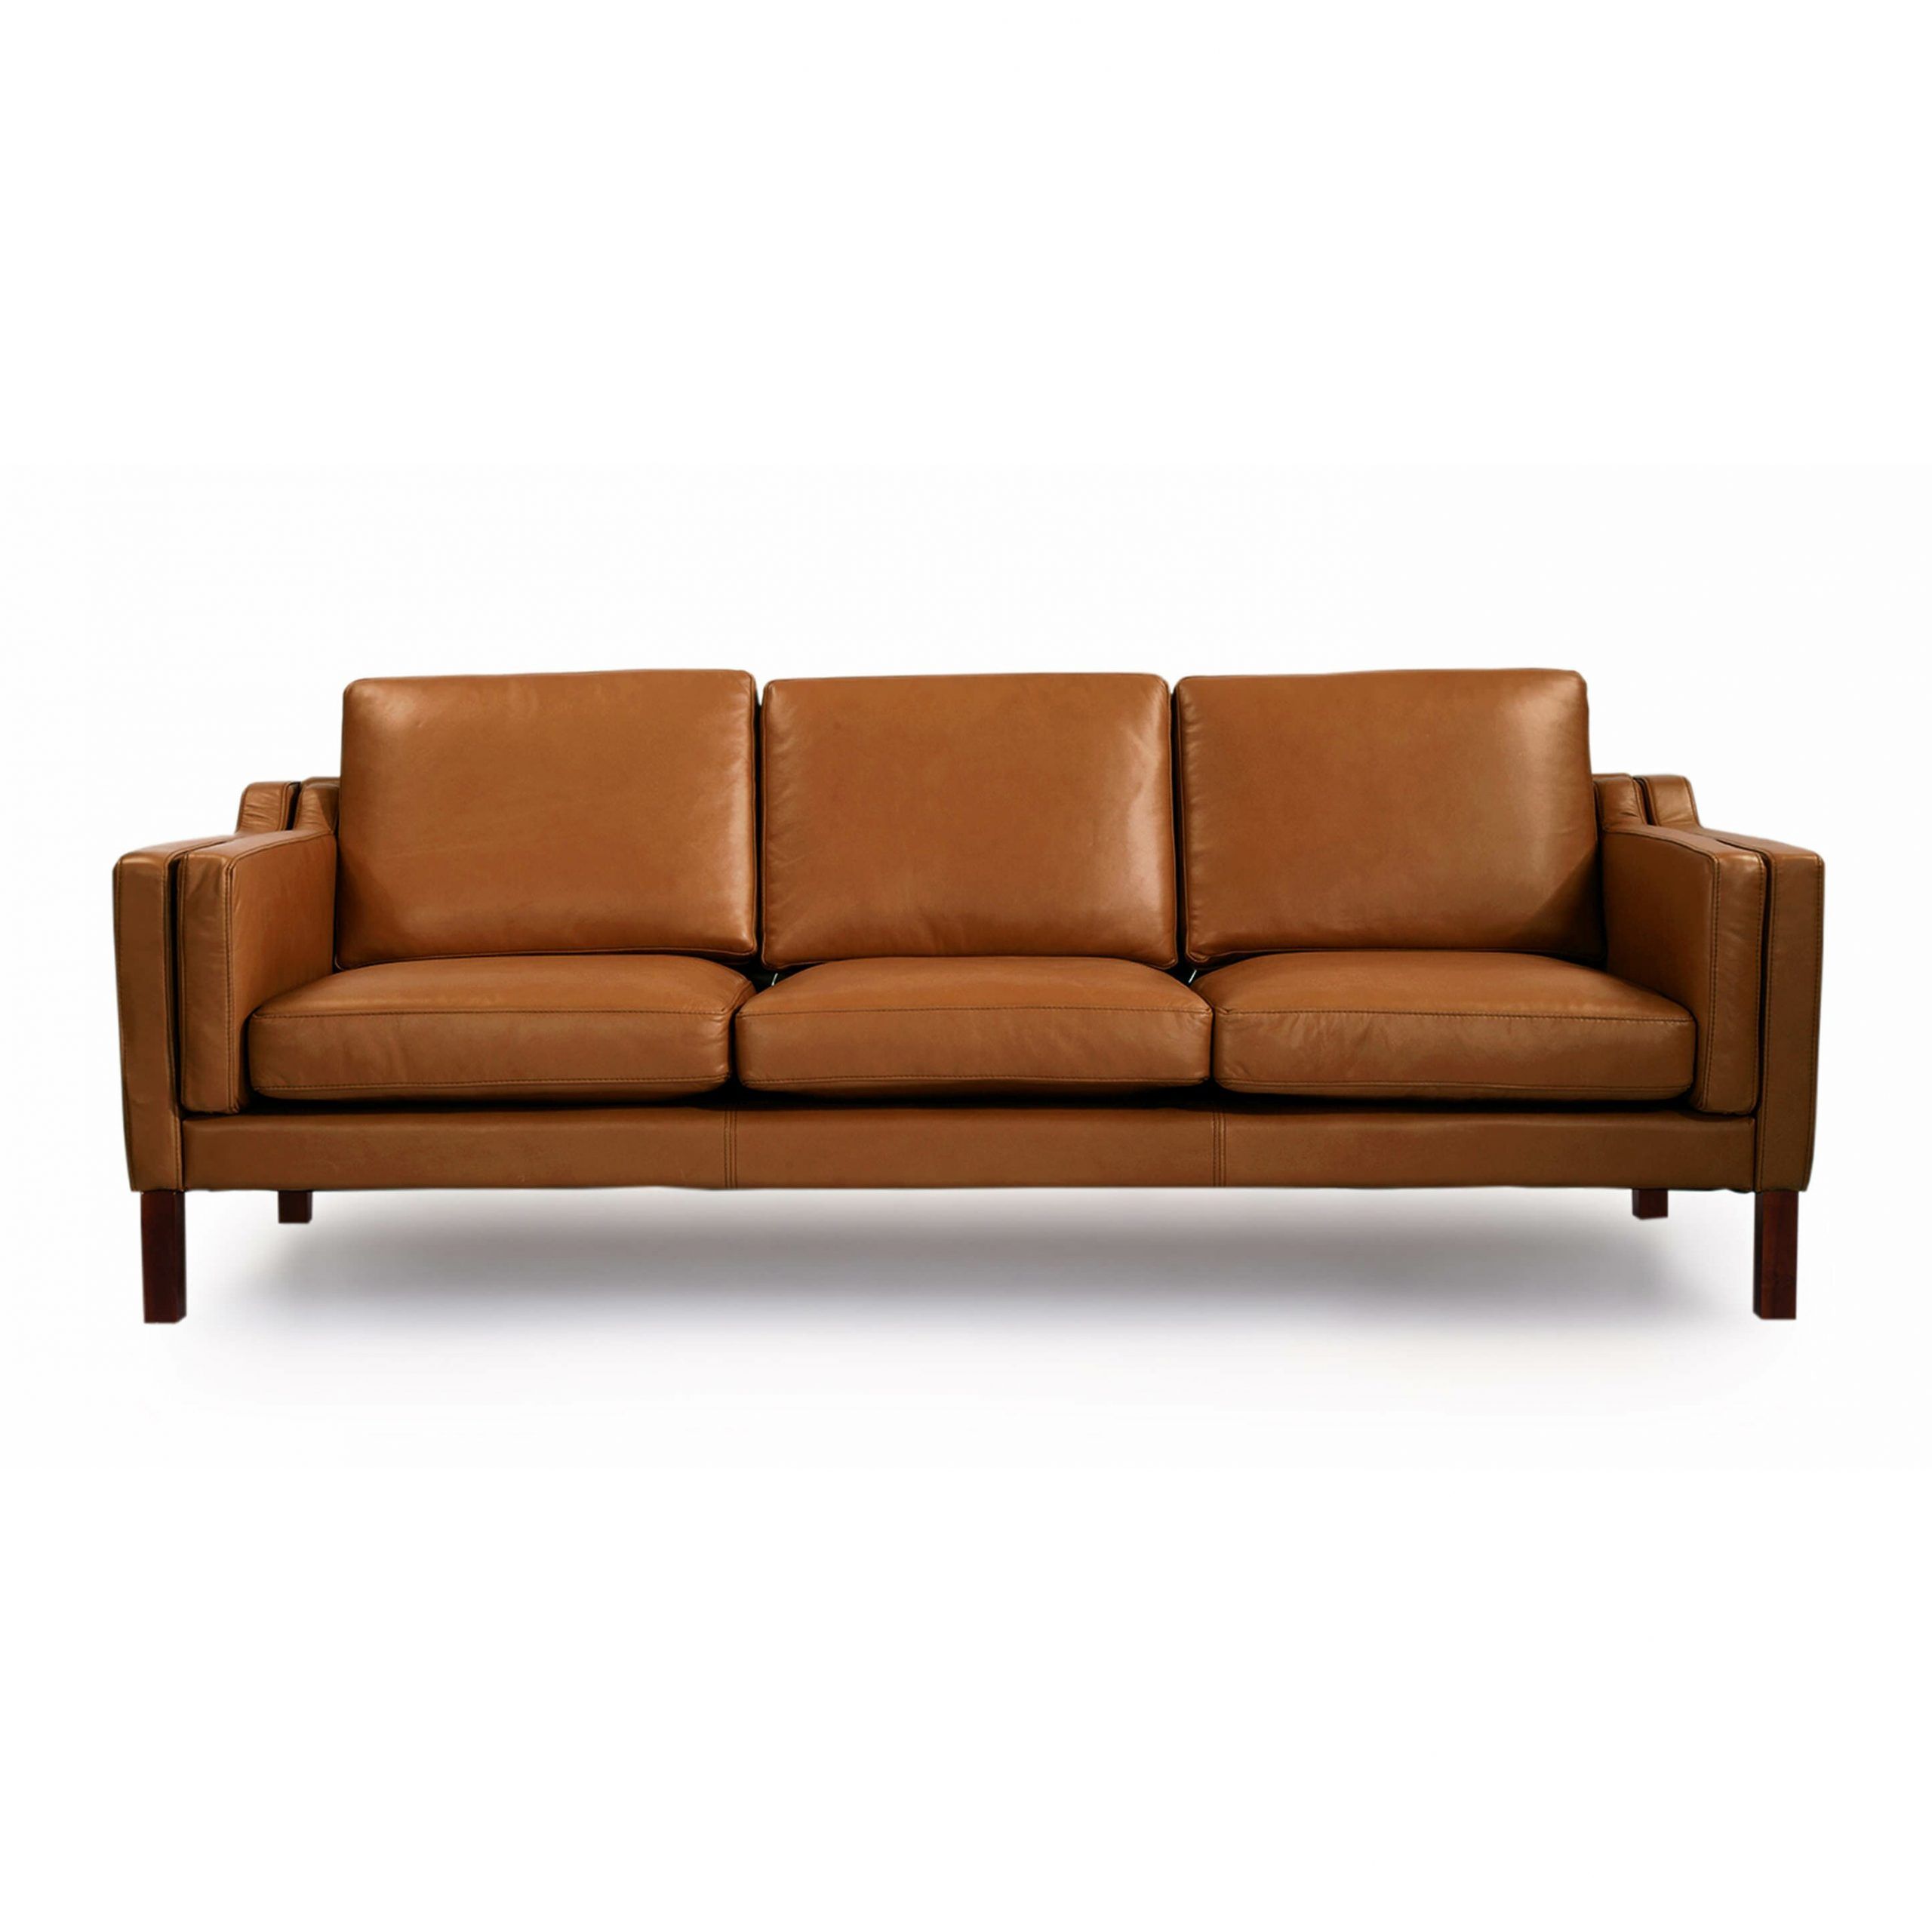 Mid Century Leather Sofa With Riley Retro Mid Century Modern Fabric Upholstered Left Facing Chaise Sectional Sofas (View 7 of 15)